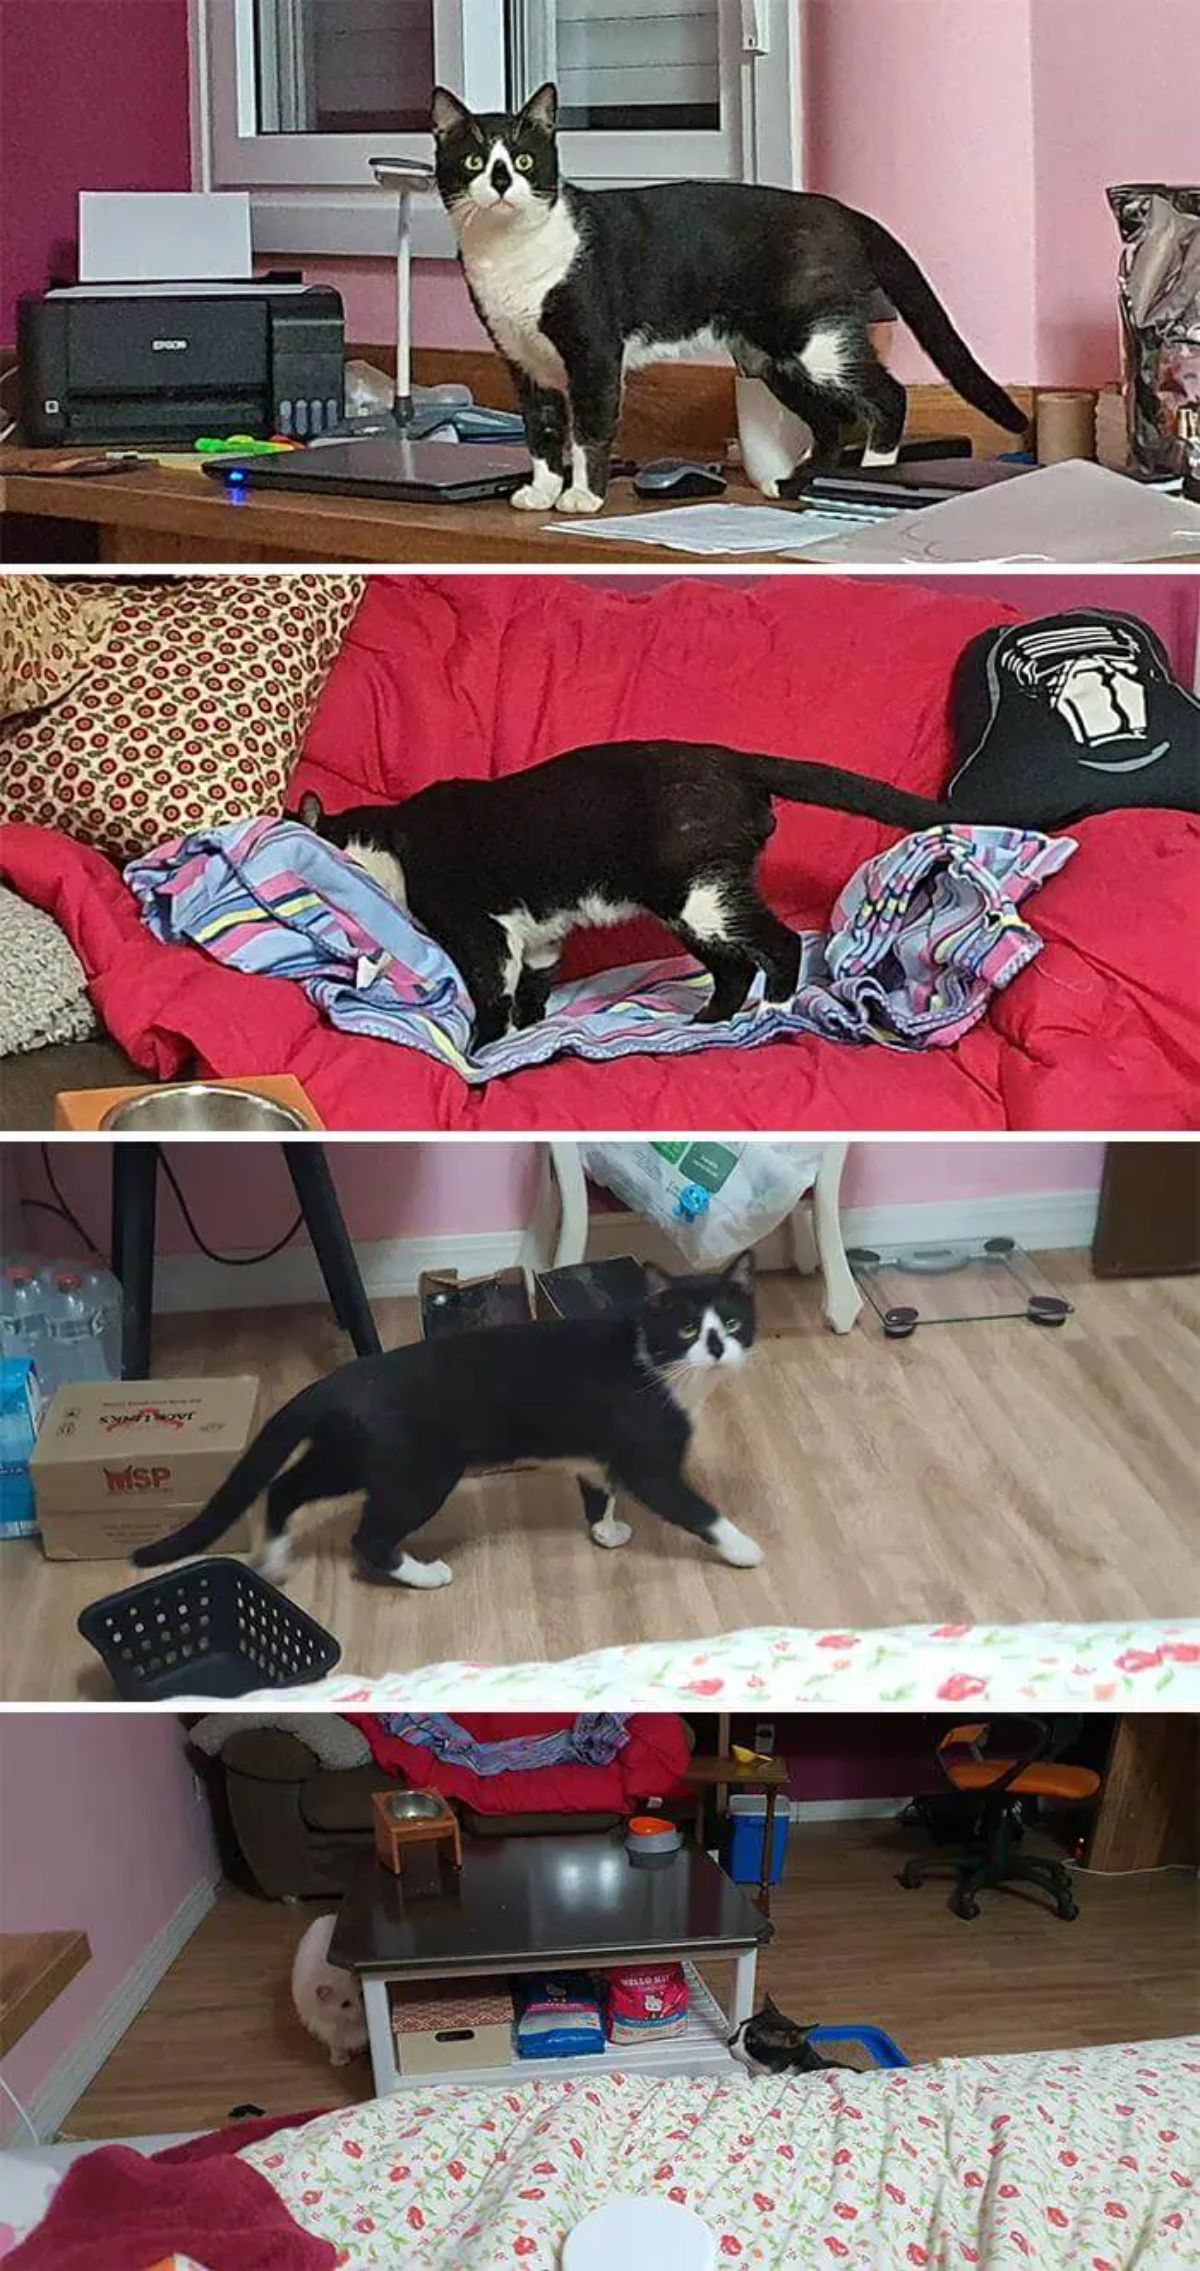 4 photos of a black and white cat inside a bedroom